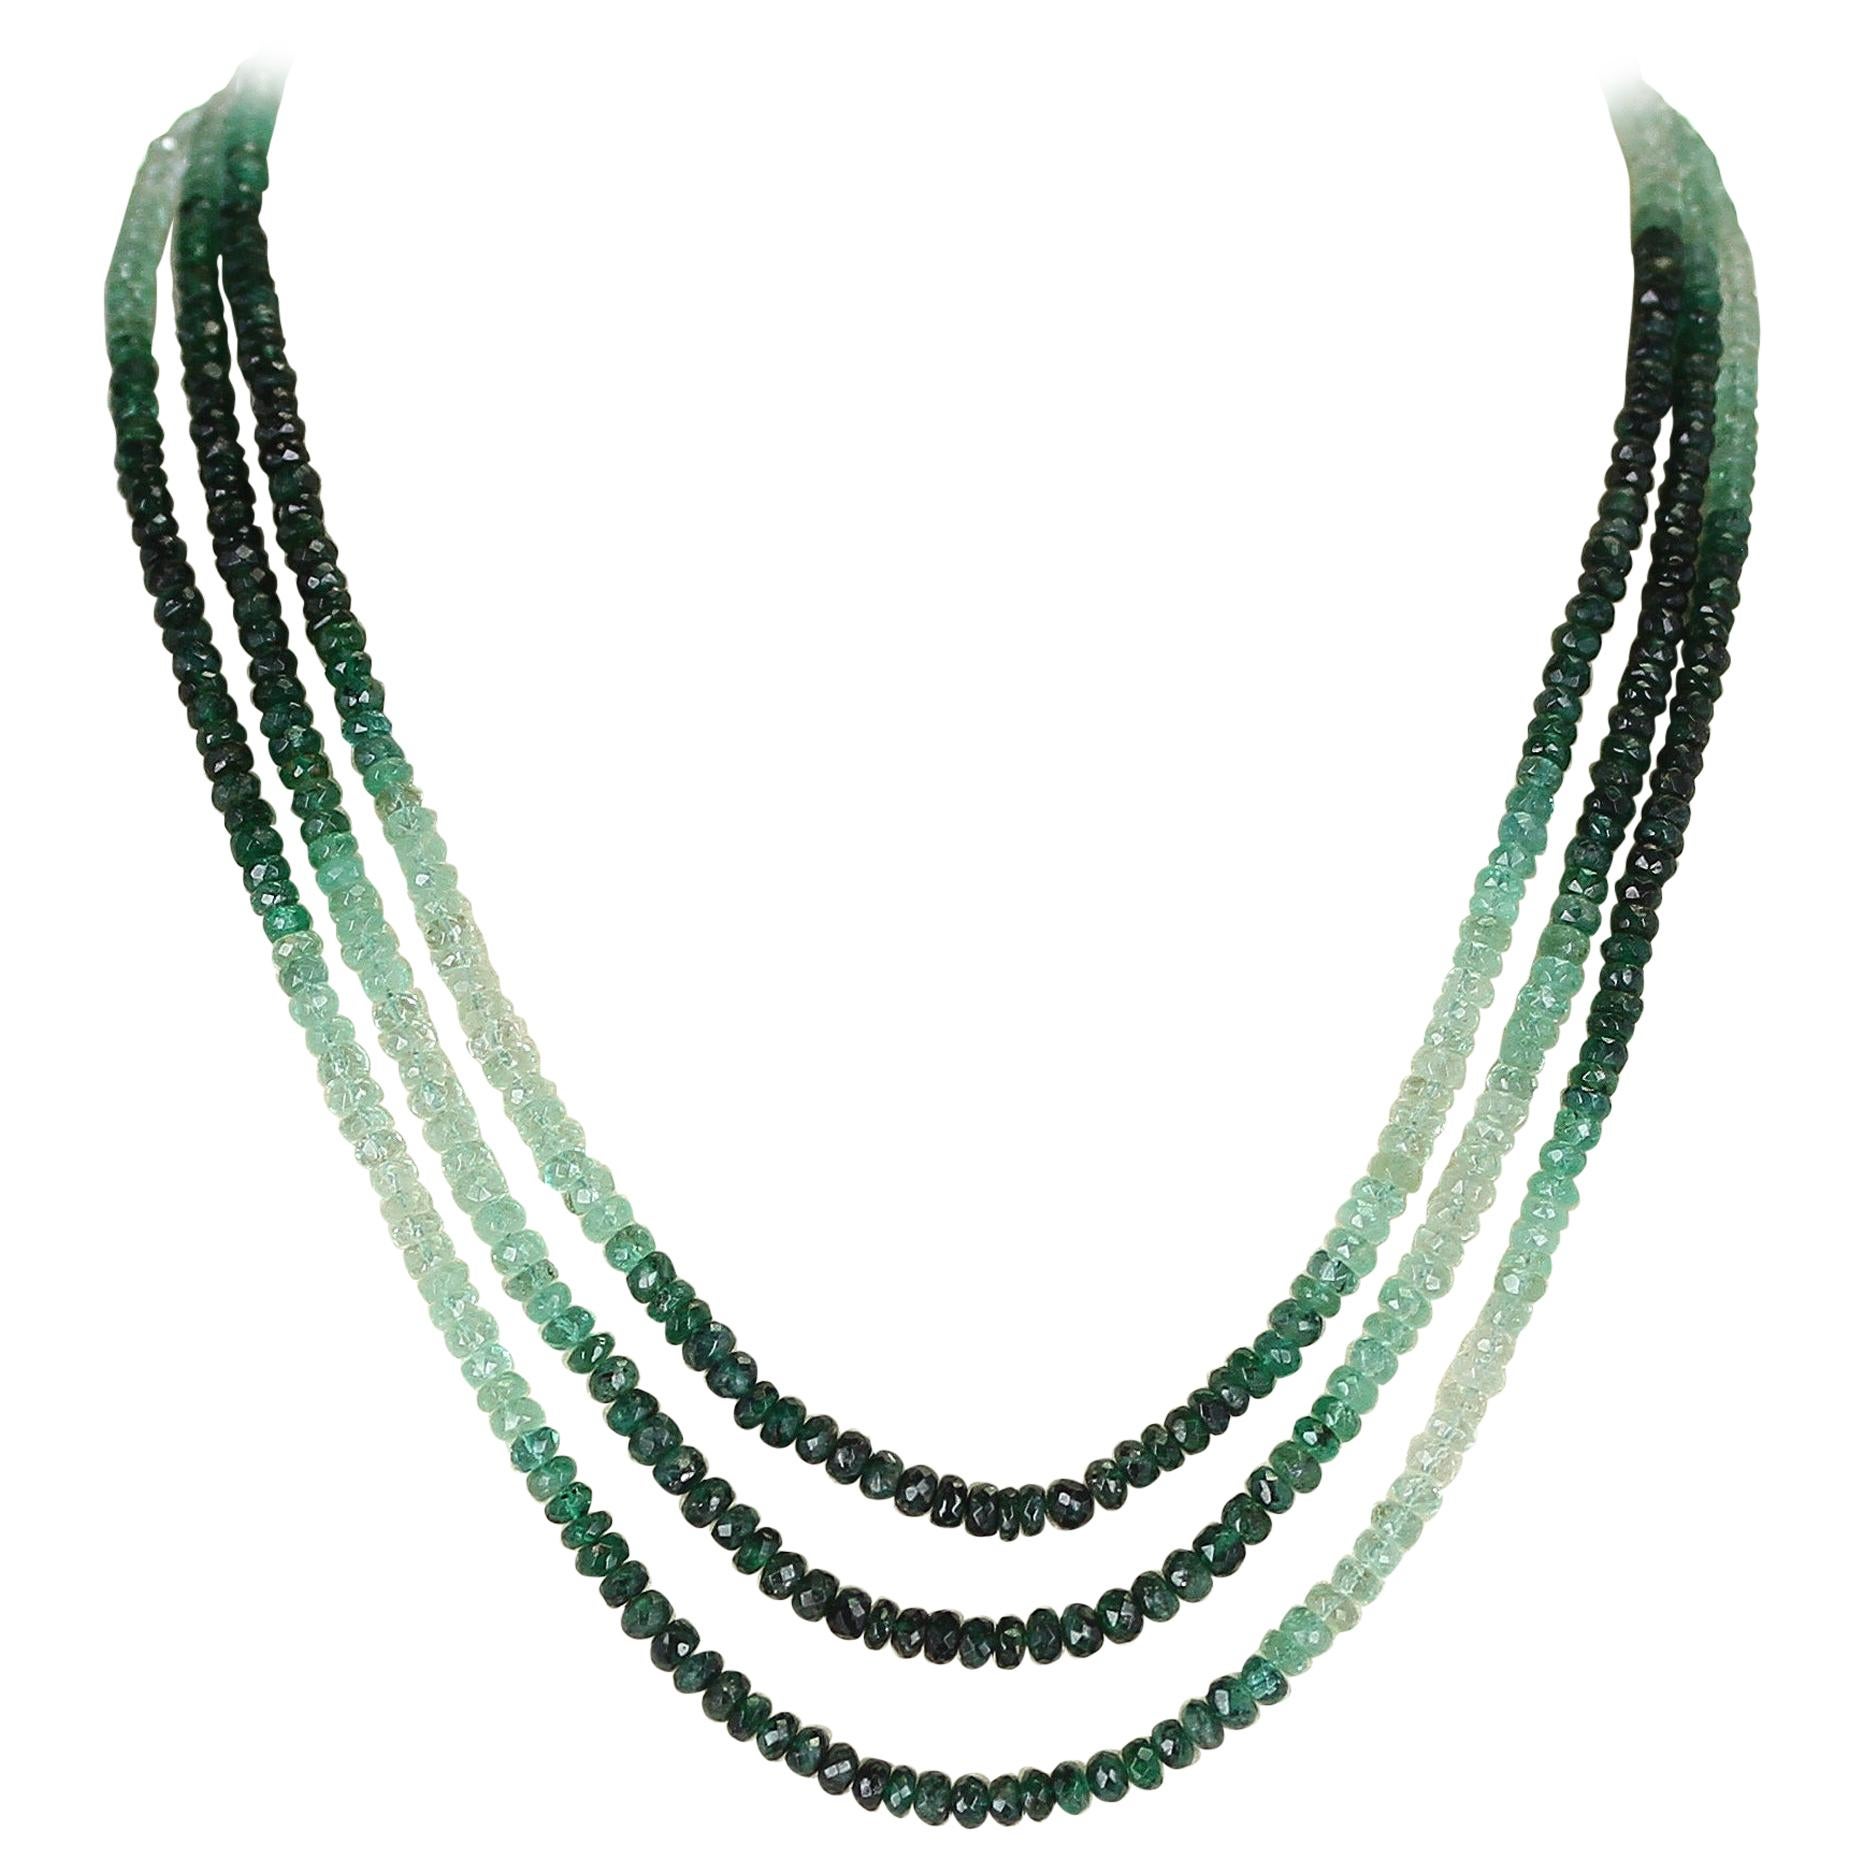 Genuine and Natural Shaded and Faceted Emerald Beads Necklace, 14K Yellow Gold